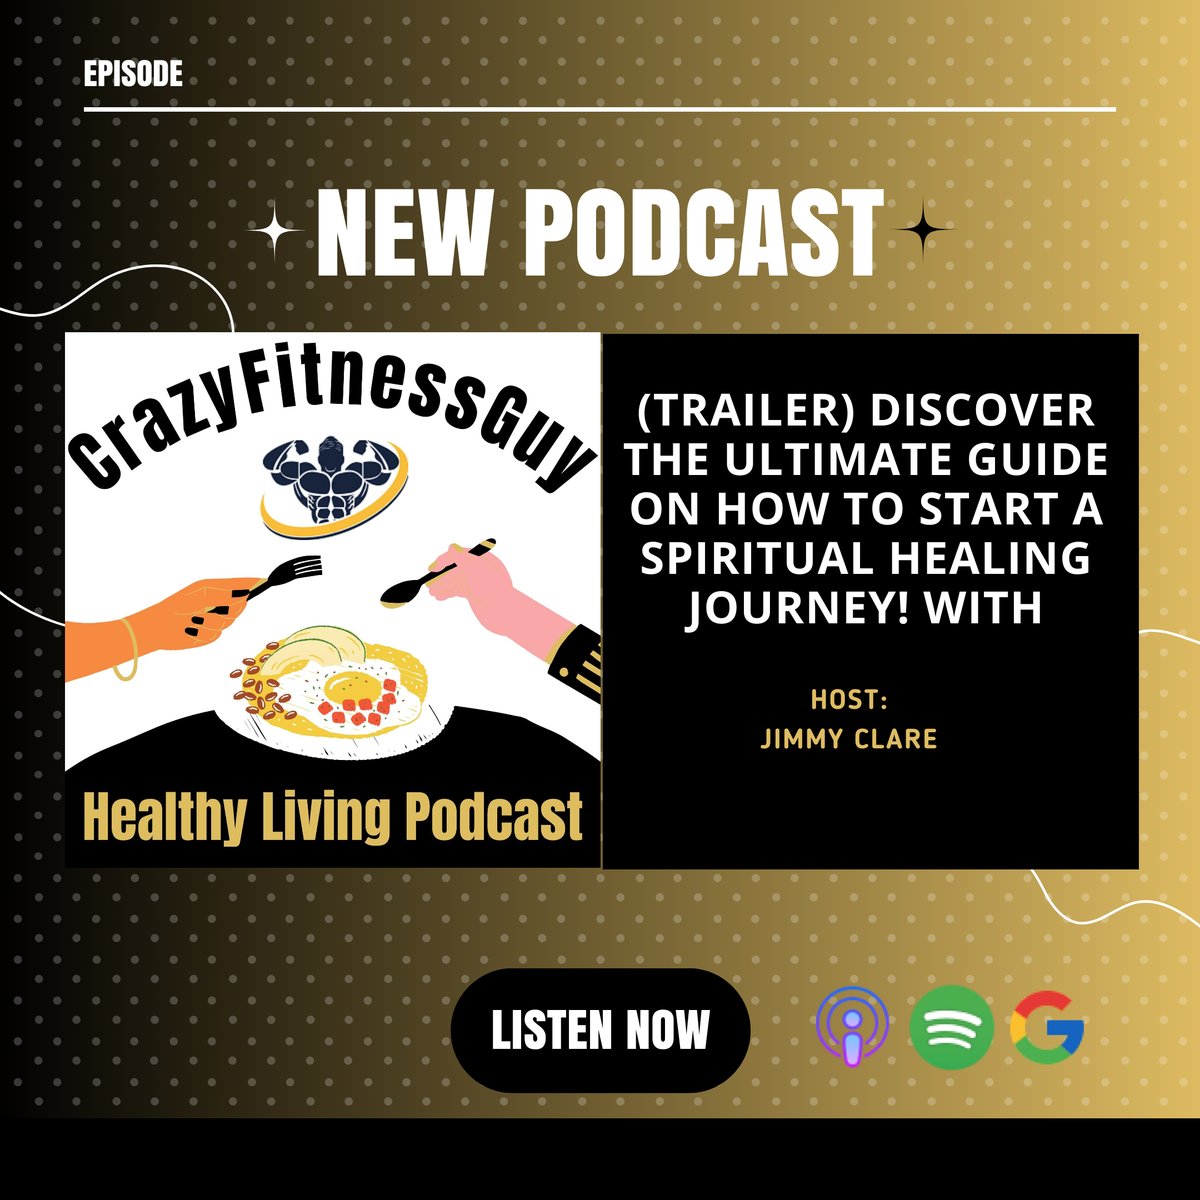 🎧 Embark on a transformative path with the latest CrazyFitnessGuy Healthy Living Podcast trailer! 💫 Dive into spiritual healing & find your inner peace. Tune in now for the ultimate guide! 🌟 #SpiritualJourney #HealingPodcast #CrazyFitnessGuy ➡️